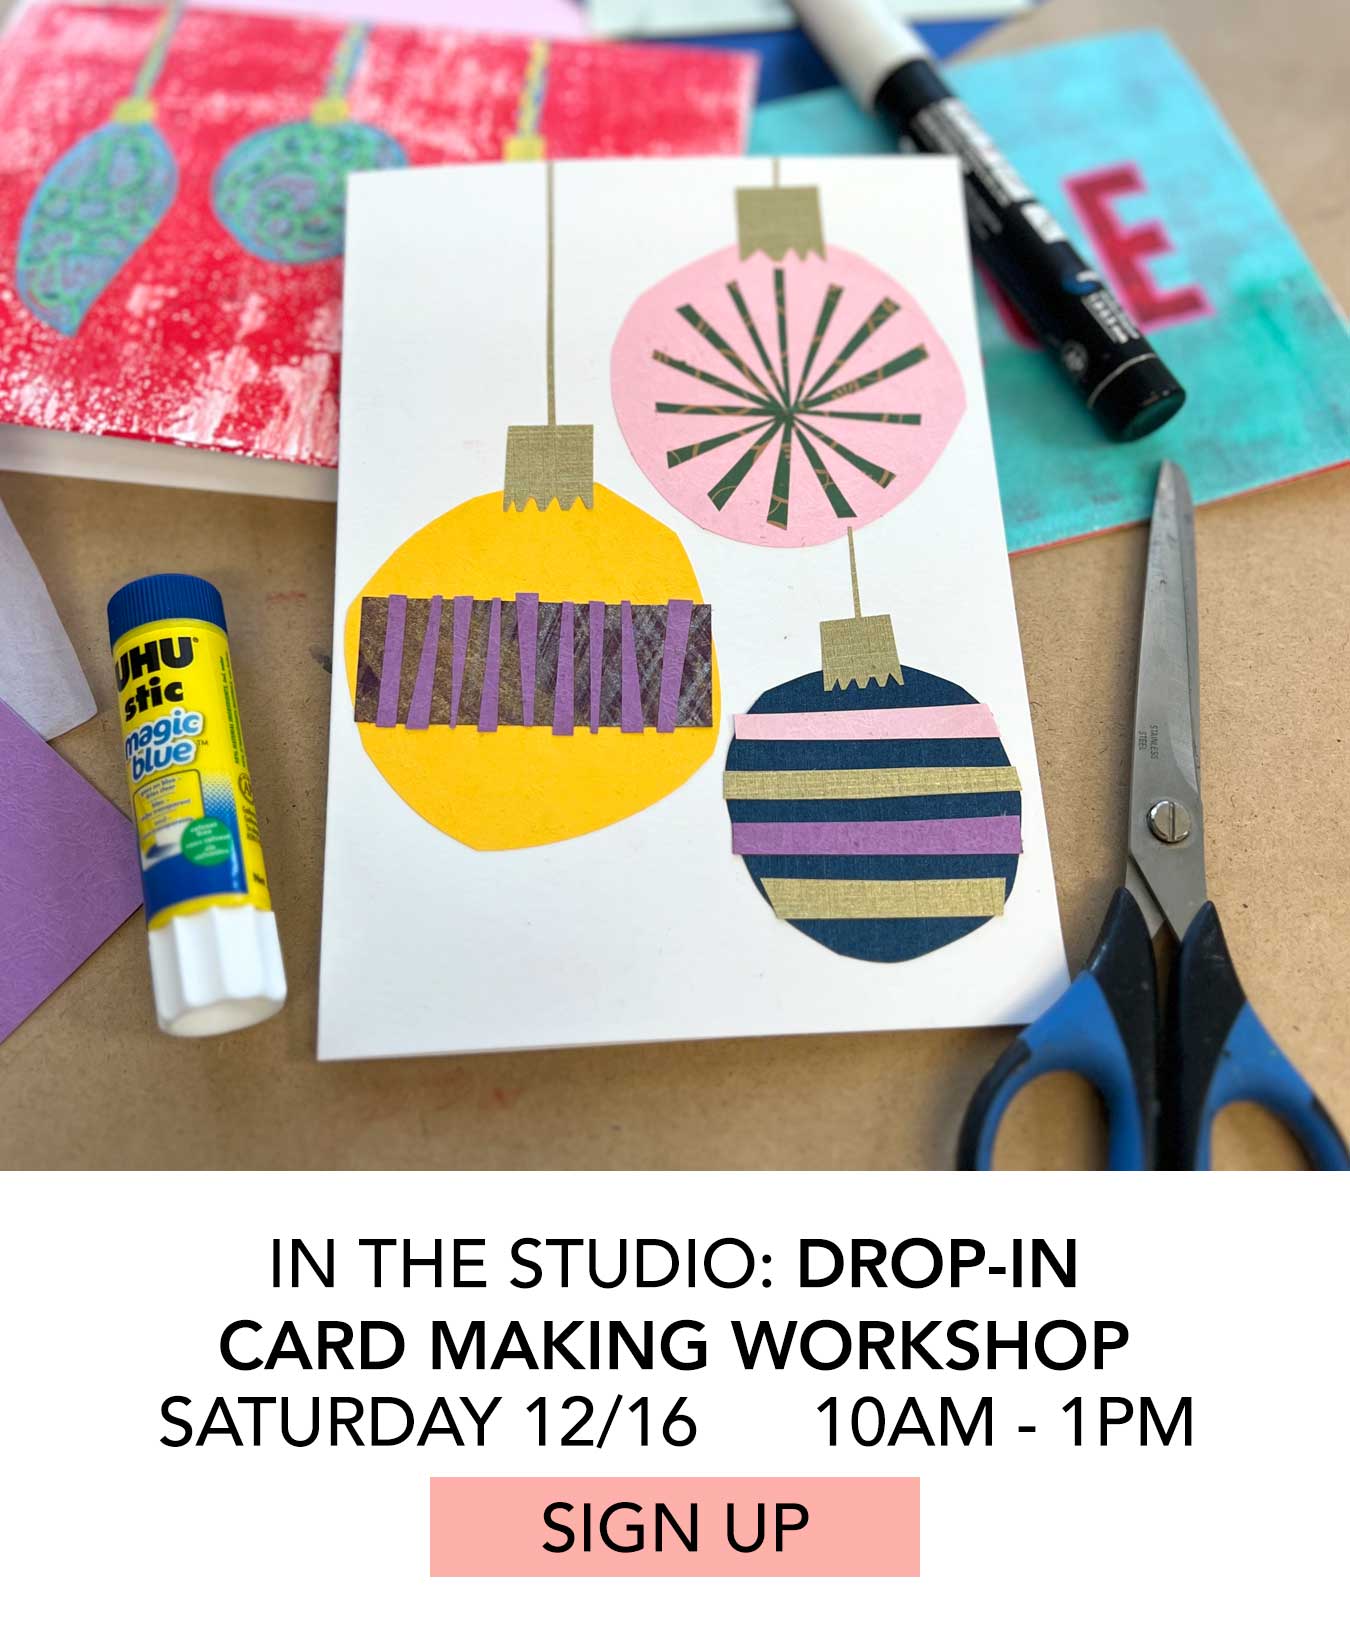 In the Studio: Drop-In Card Making Workshop. Saturday 12/16 from 10:00am to 1:00pm. Click to Sign Up.